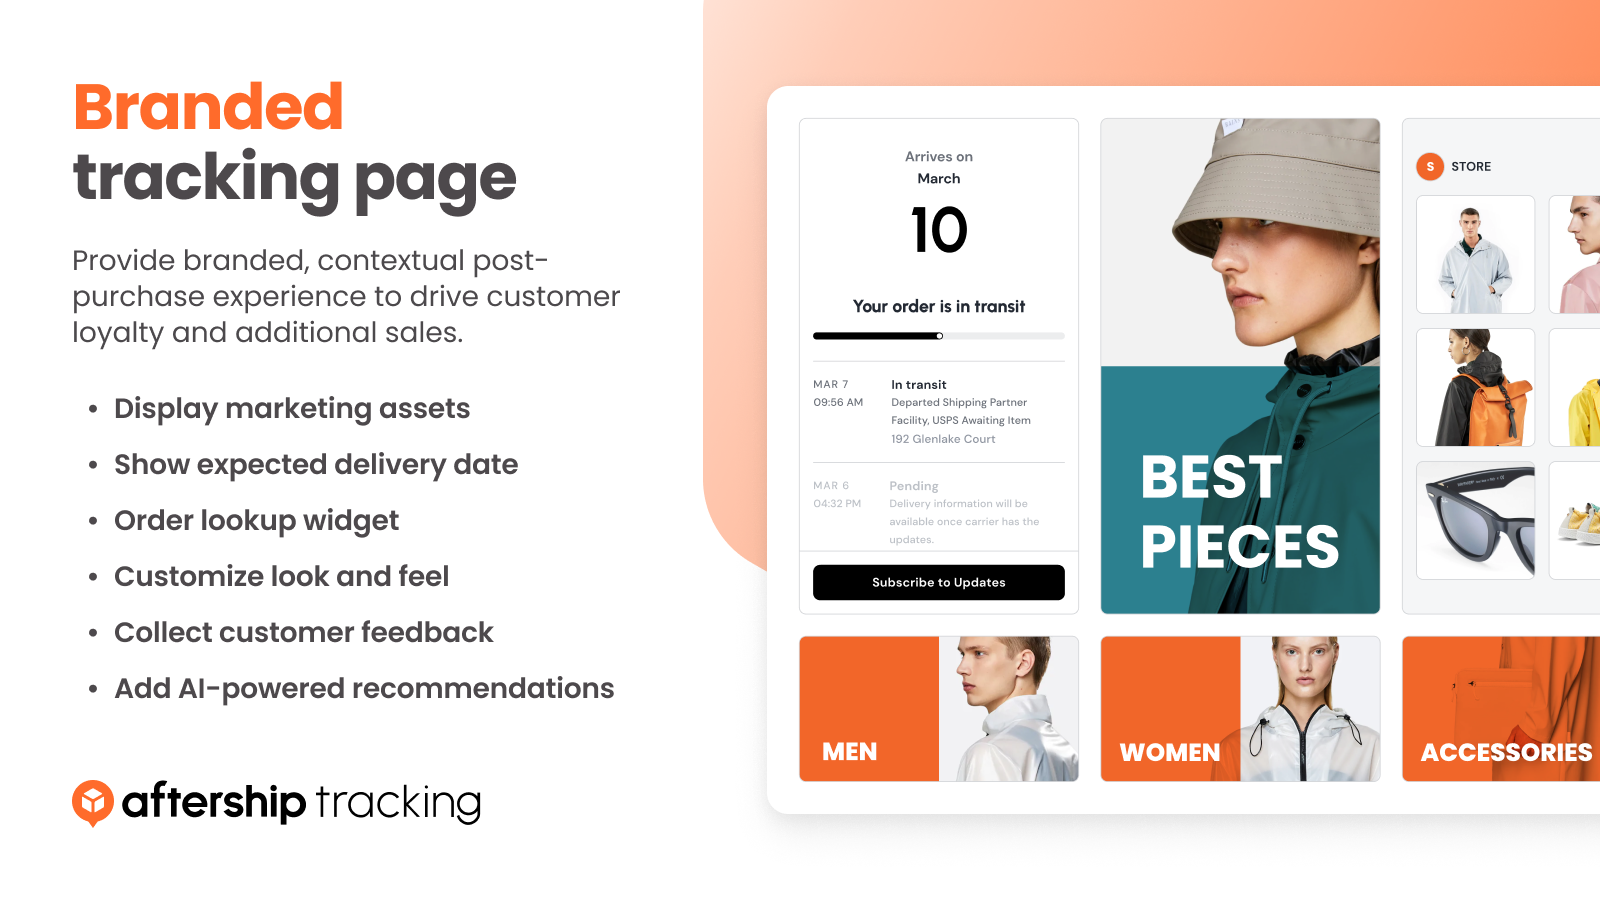  Branded tracking page, product recommendations, & social links